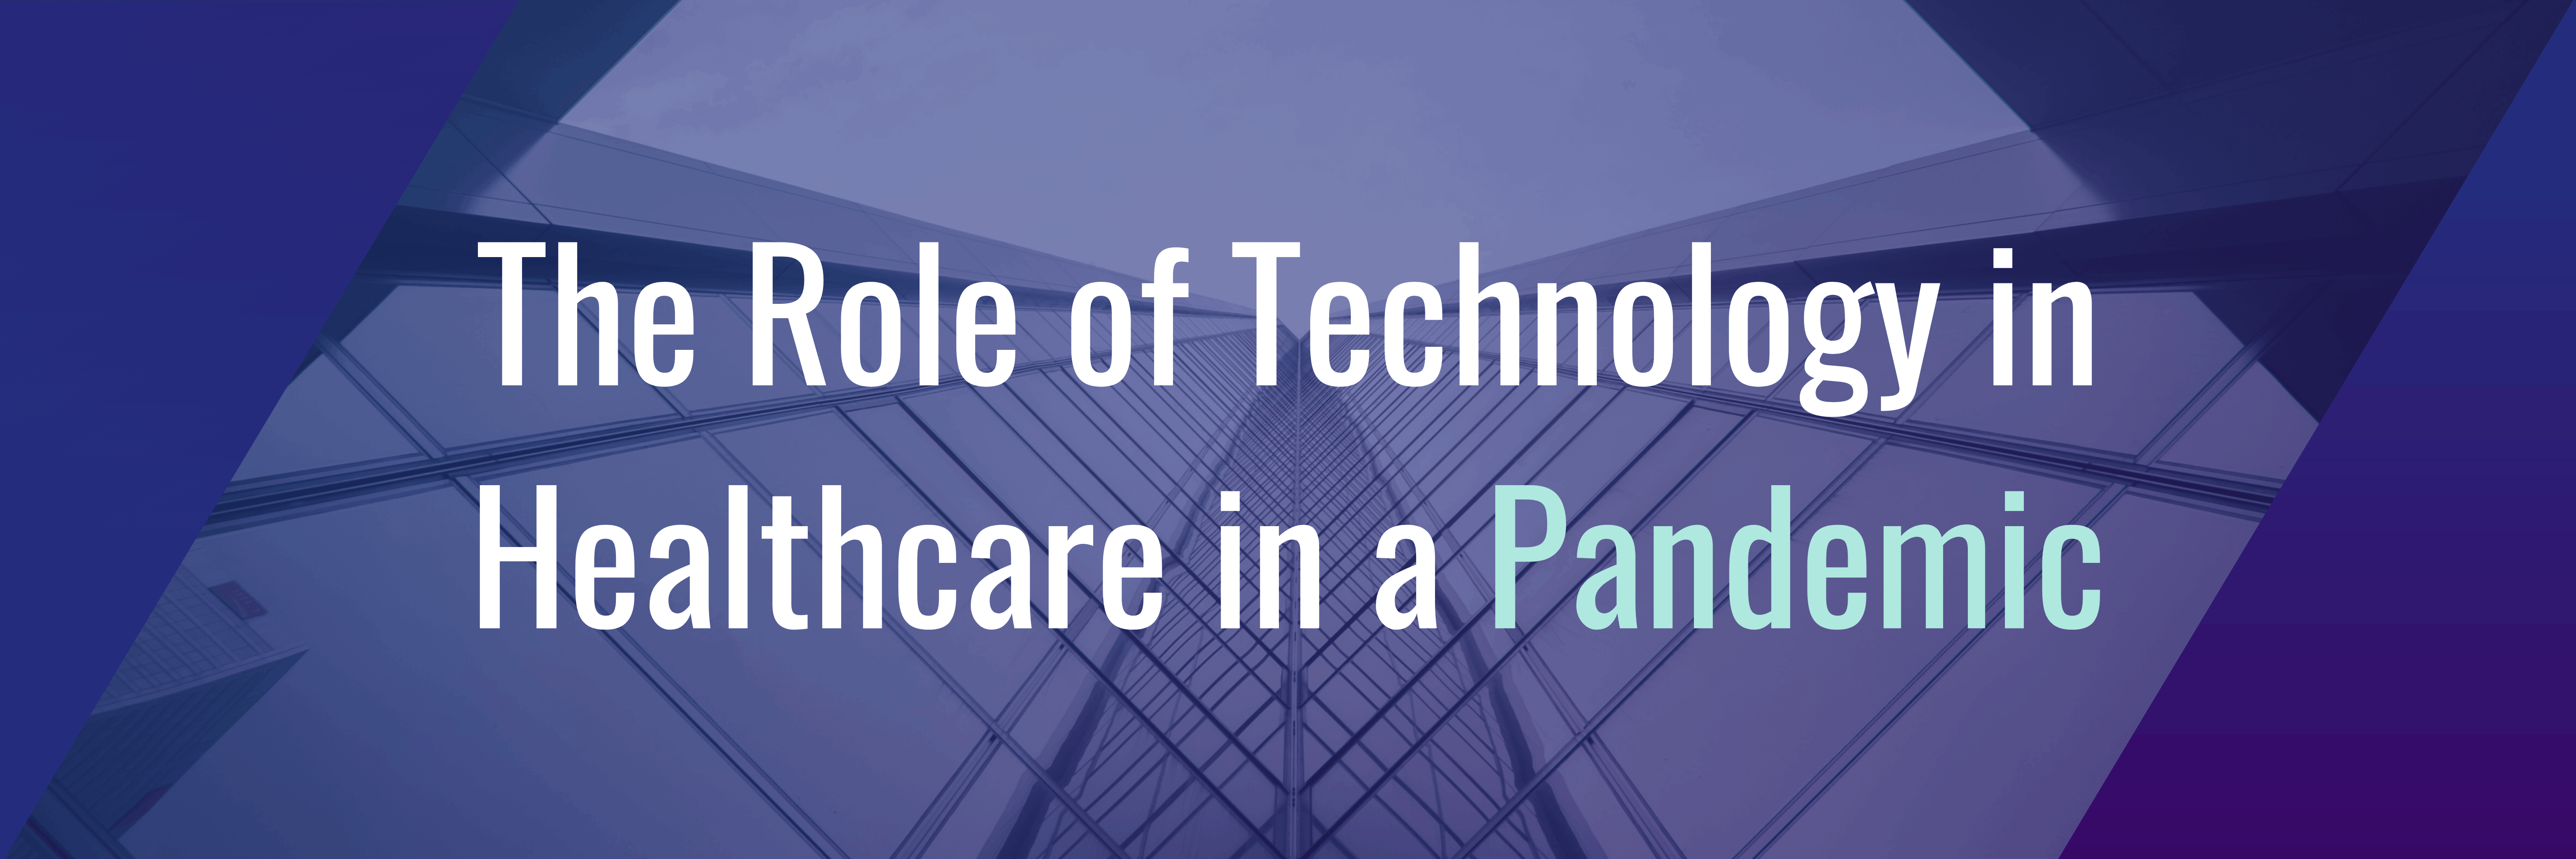 The Role of Technology in Healthcare in a Pandemic